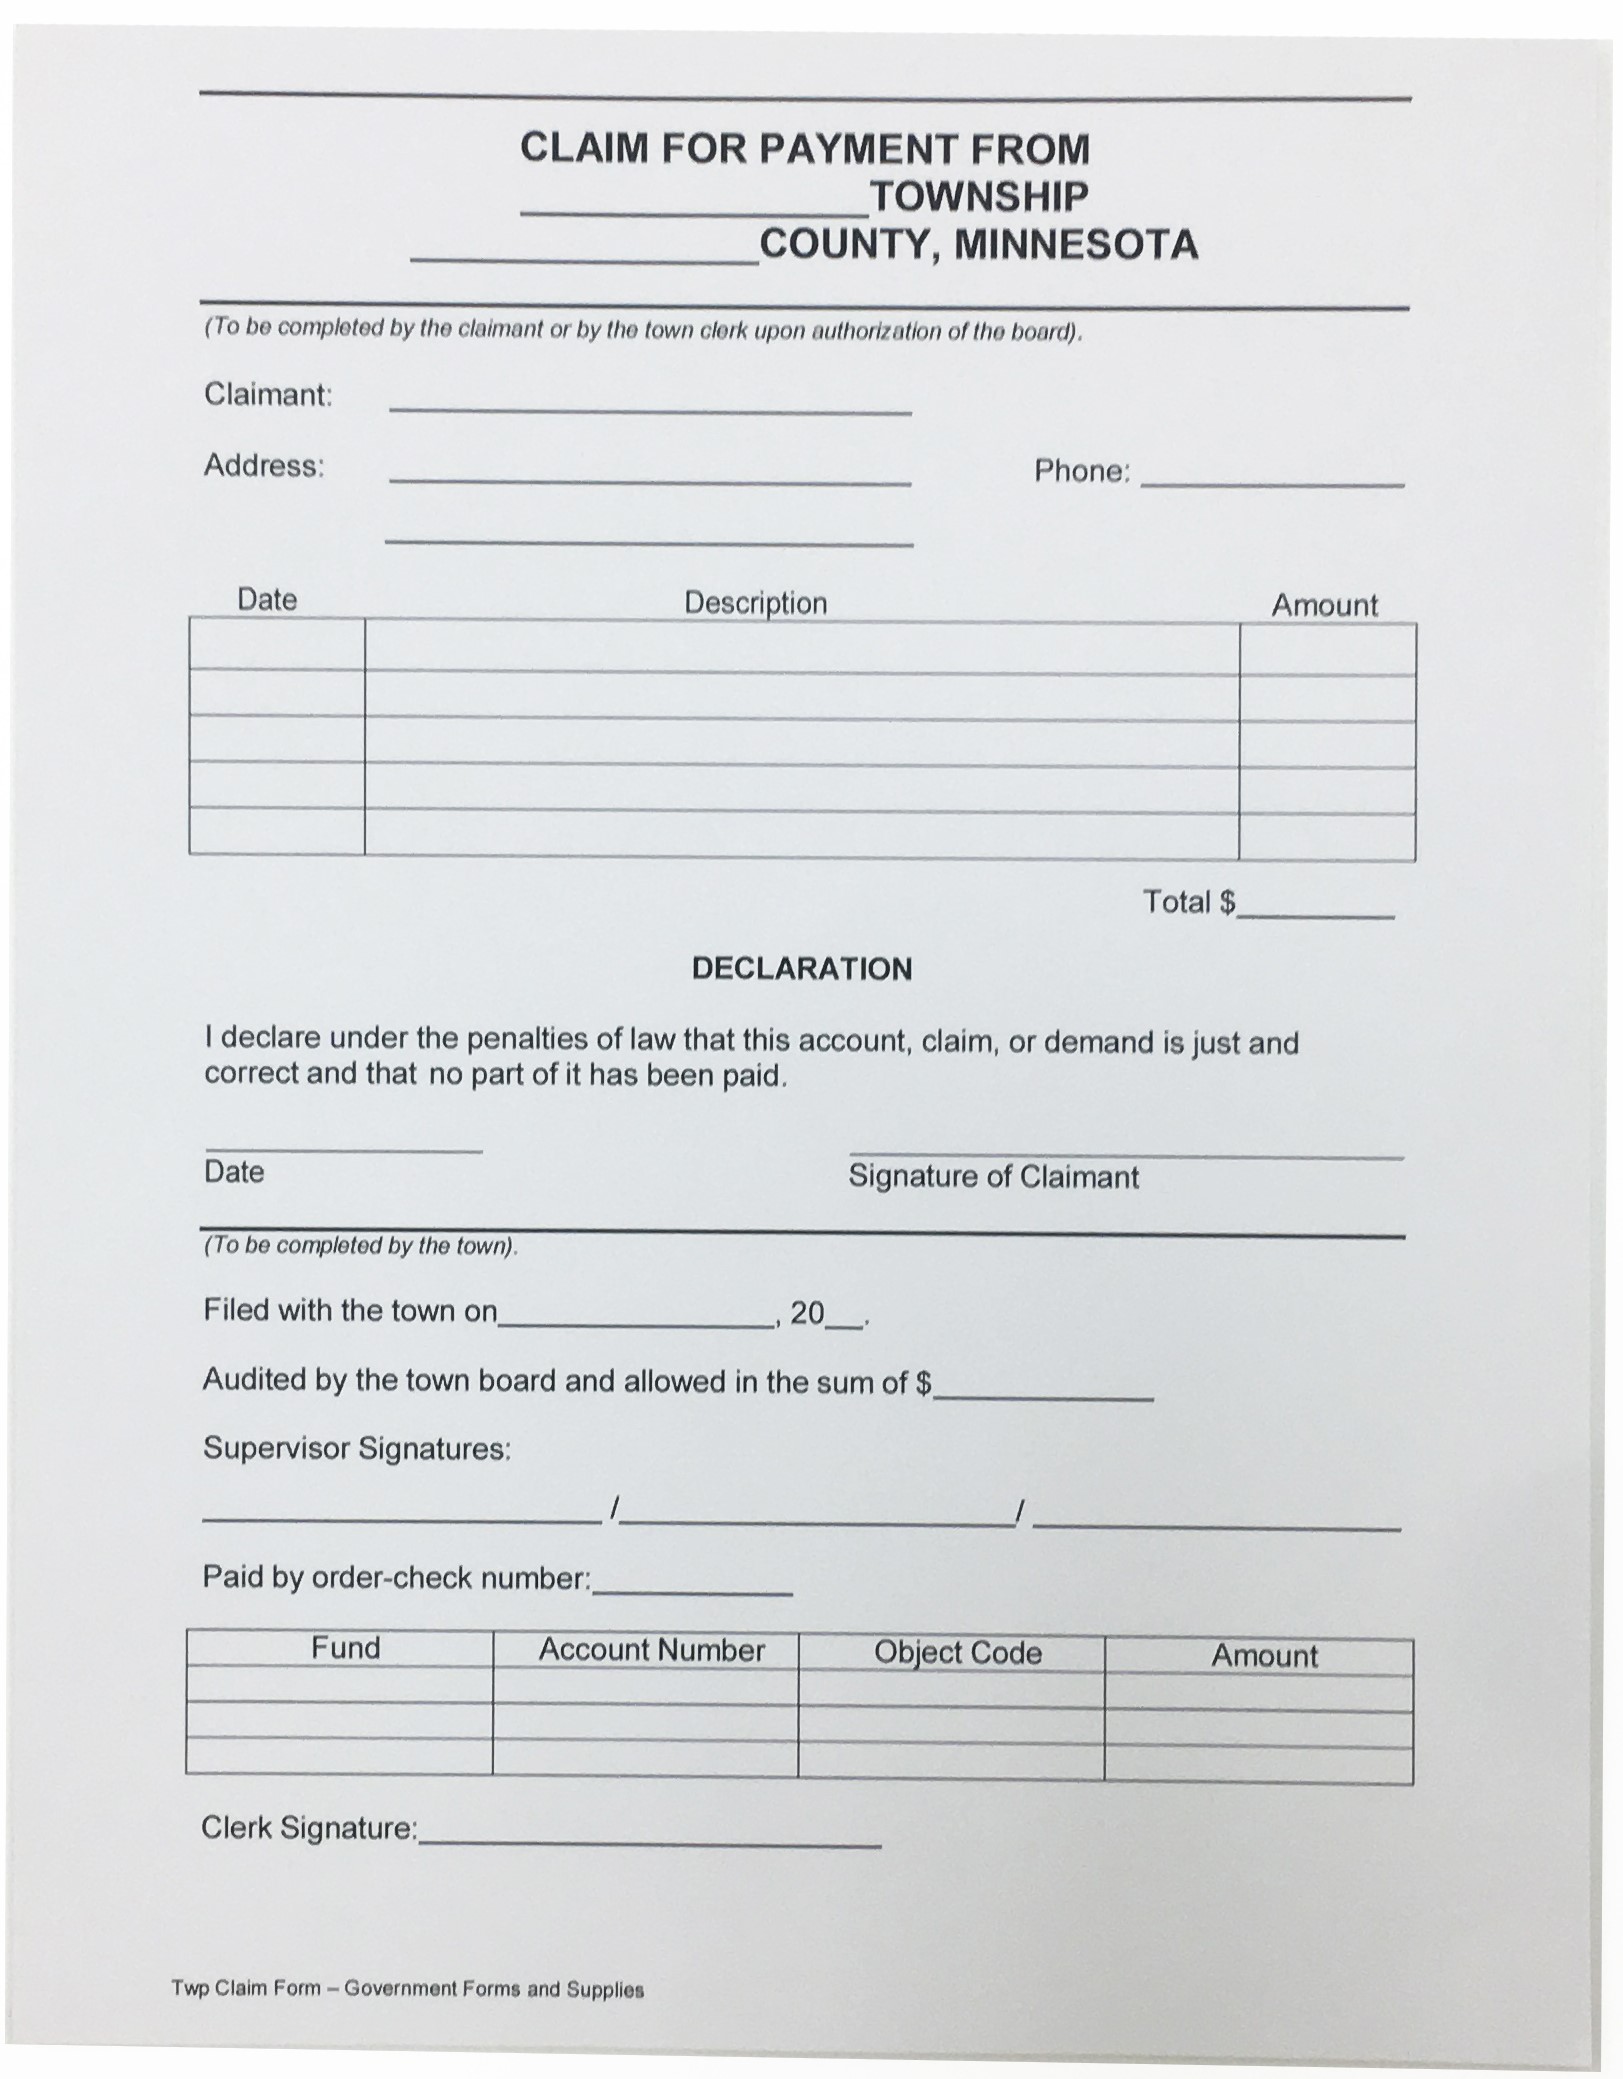 Township Claim Forms